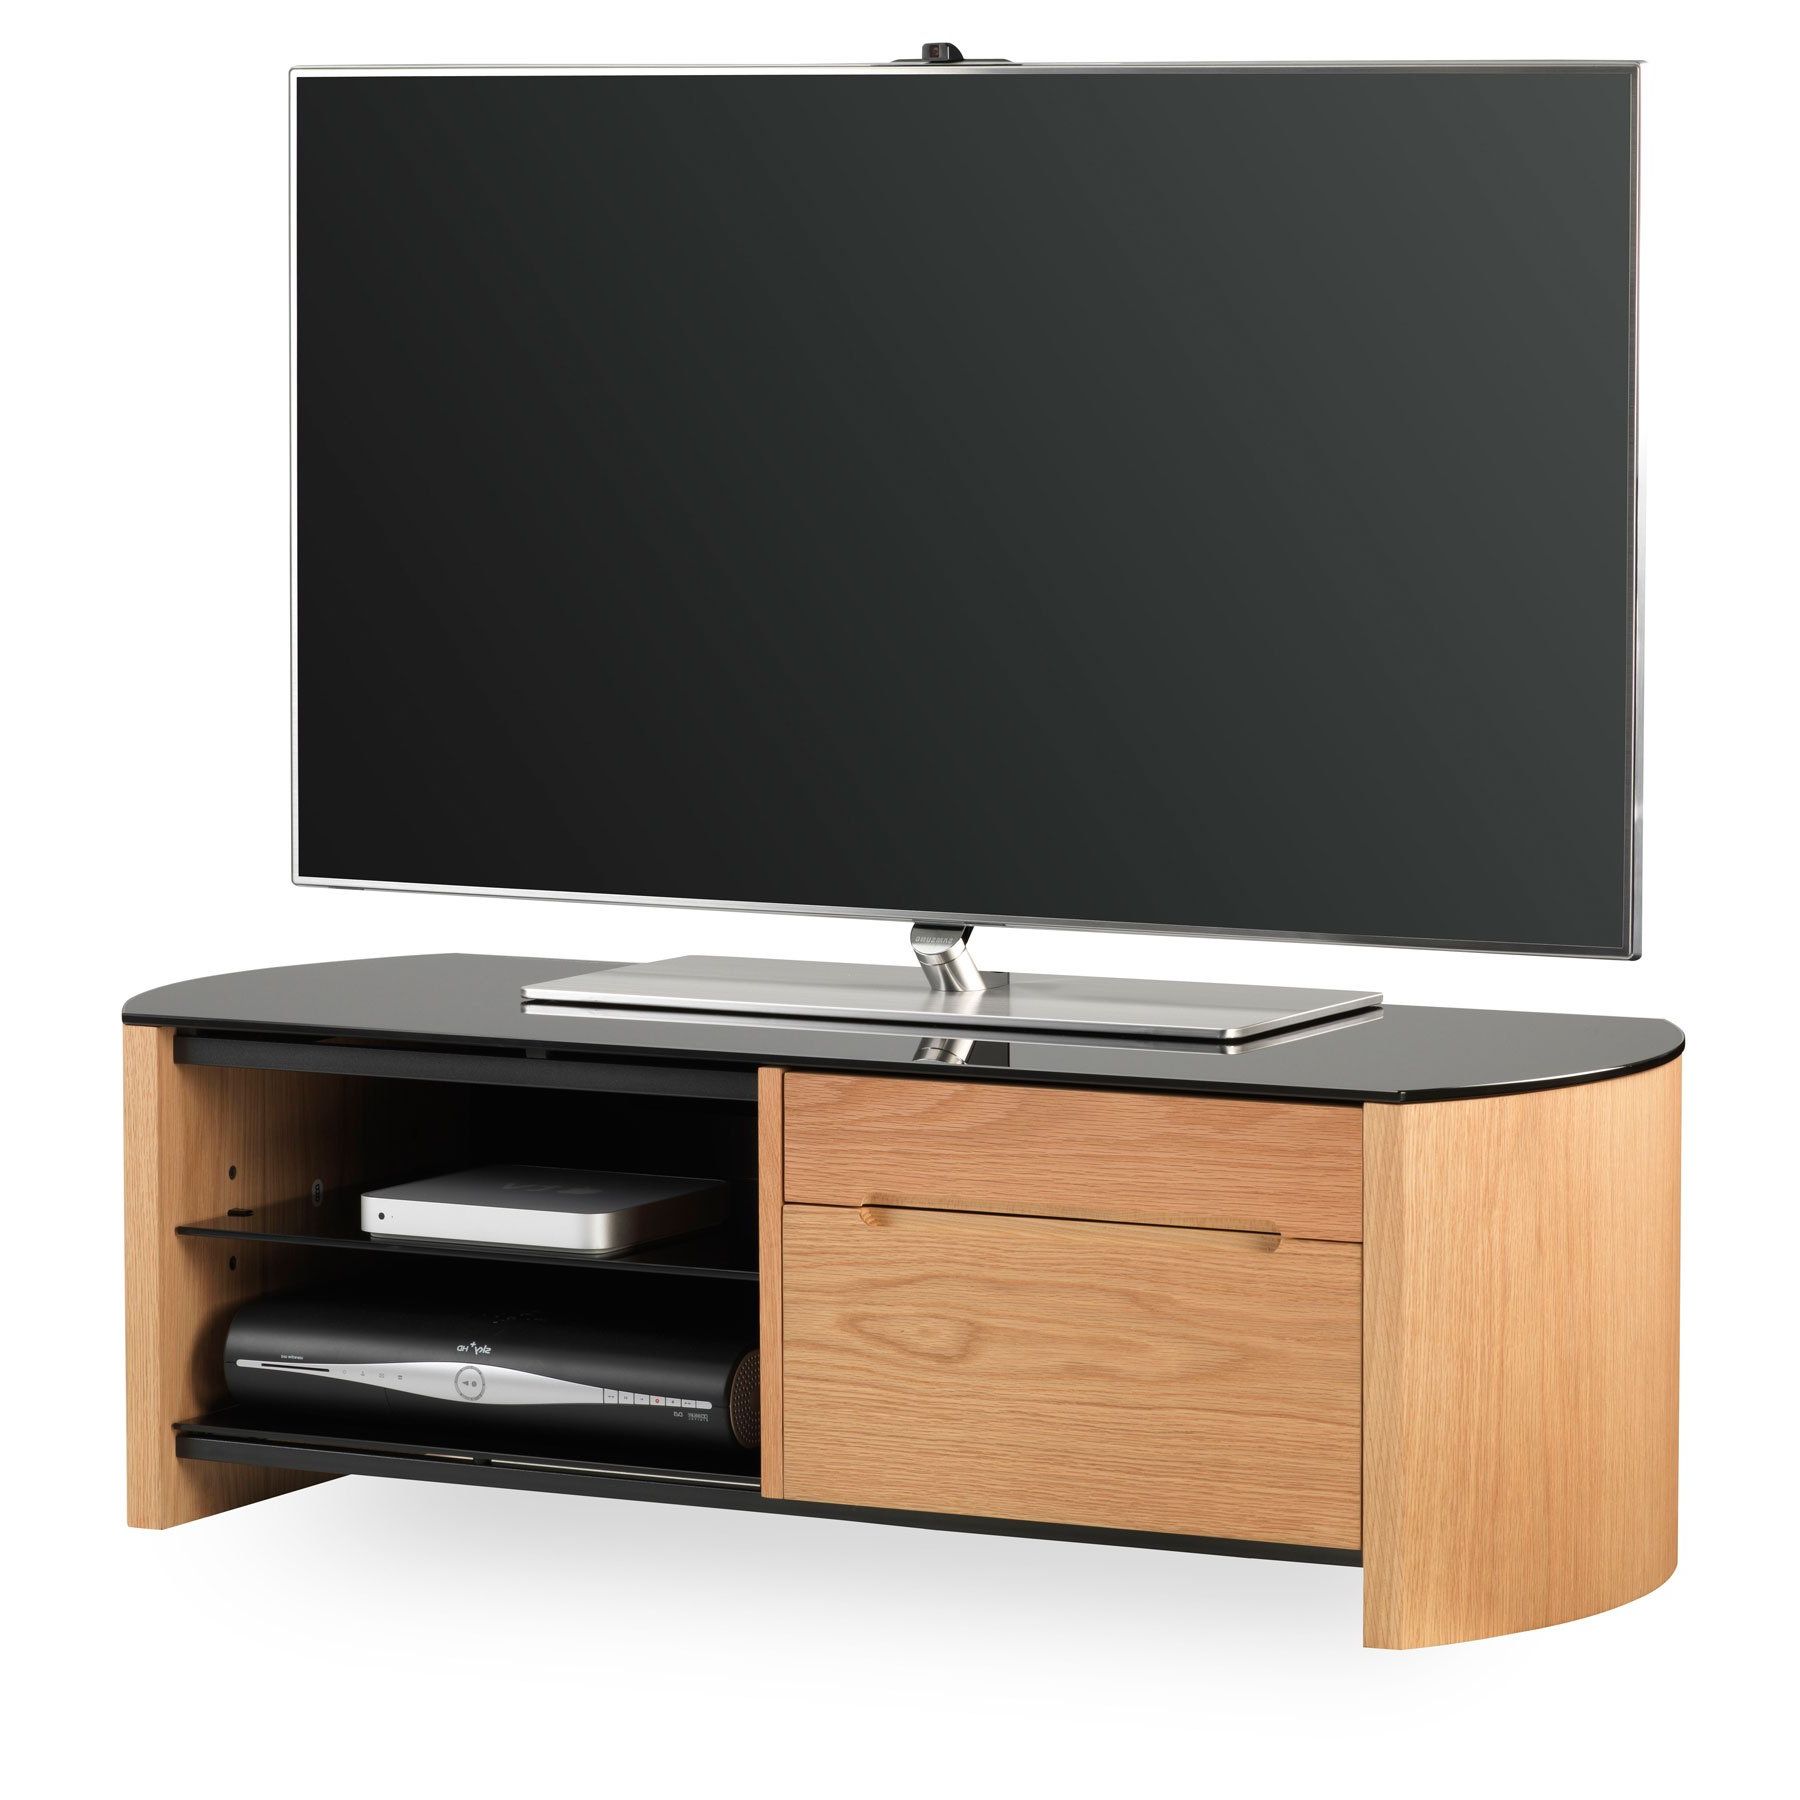 2017 Leonid Tv Stands For Tvs Up To 50" With Alphason Finewood Fw1100cb Light Oak Tv Stand For Up To  (View 6 of 25)